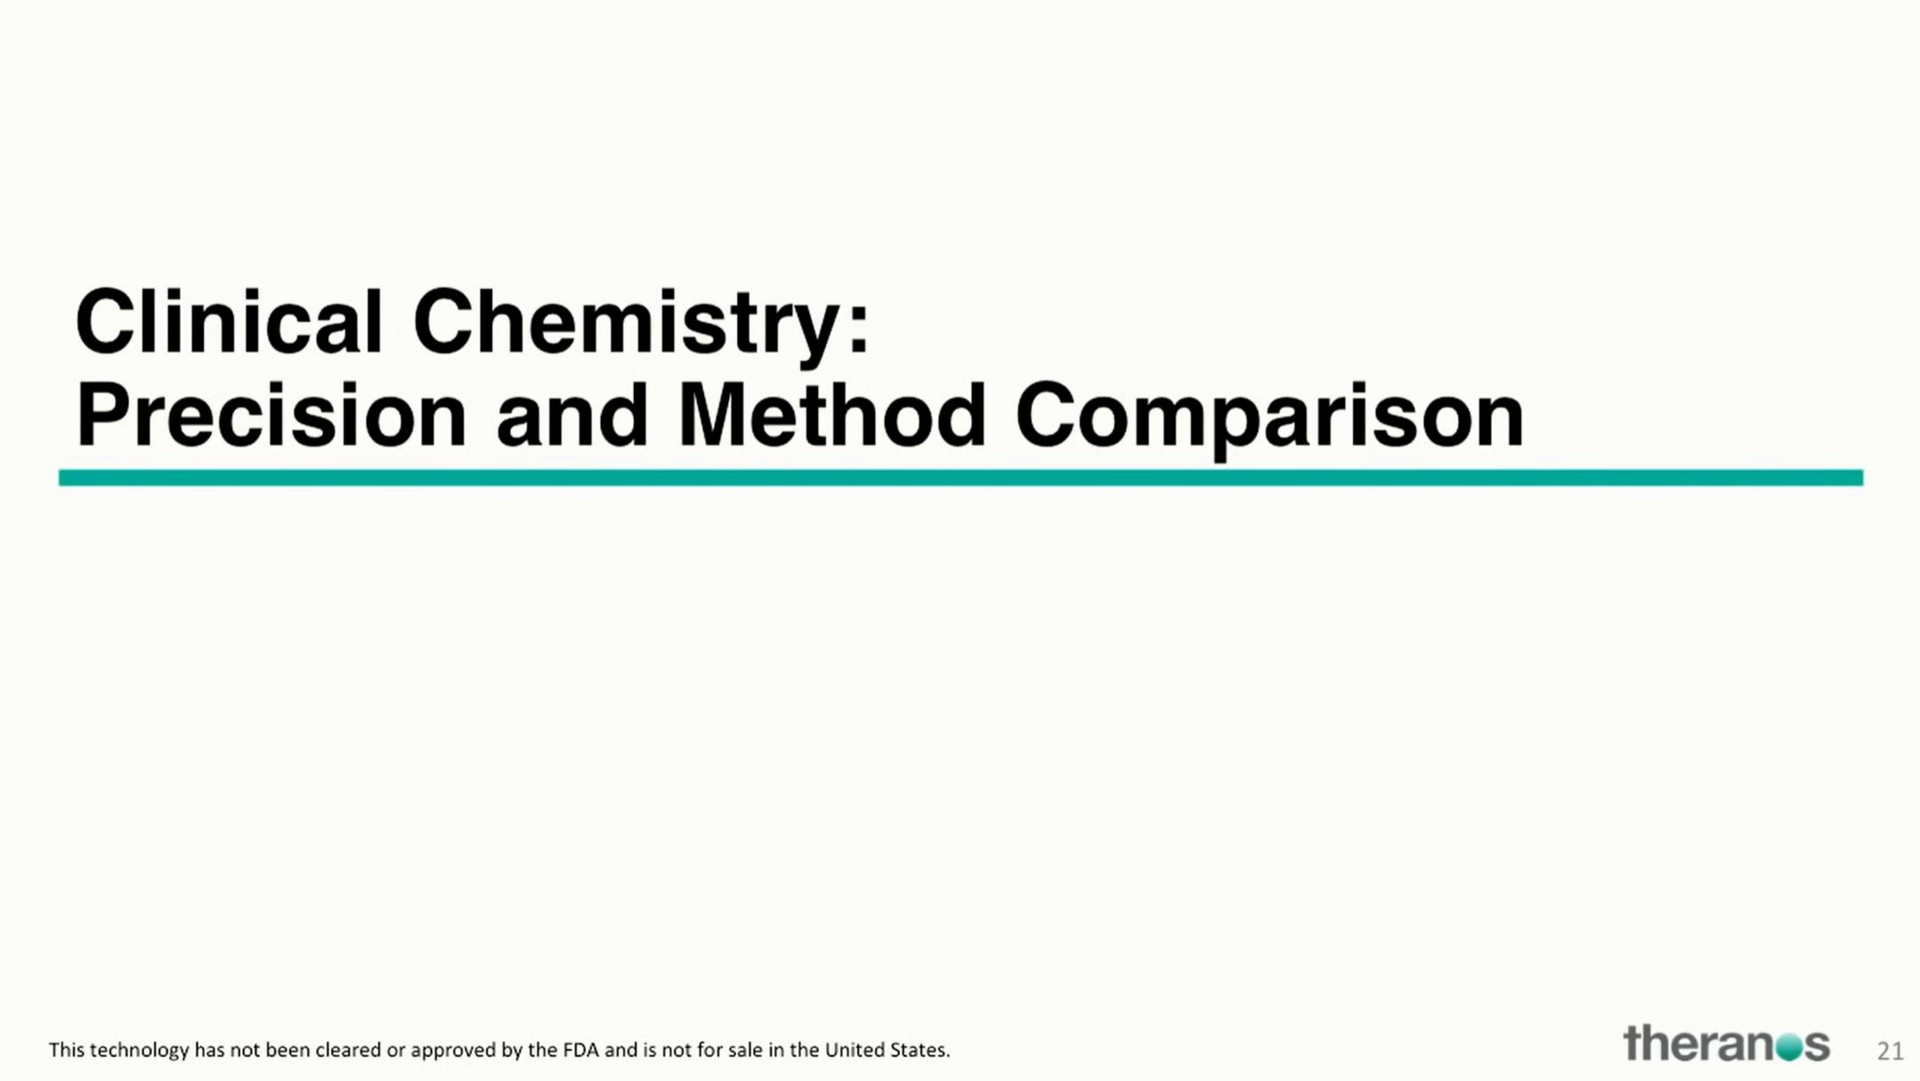 clinical chemistry precision and method comparison | Theranos